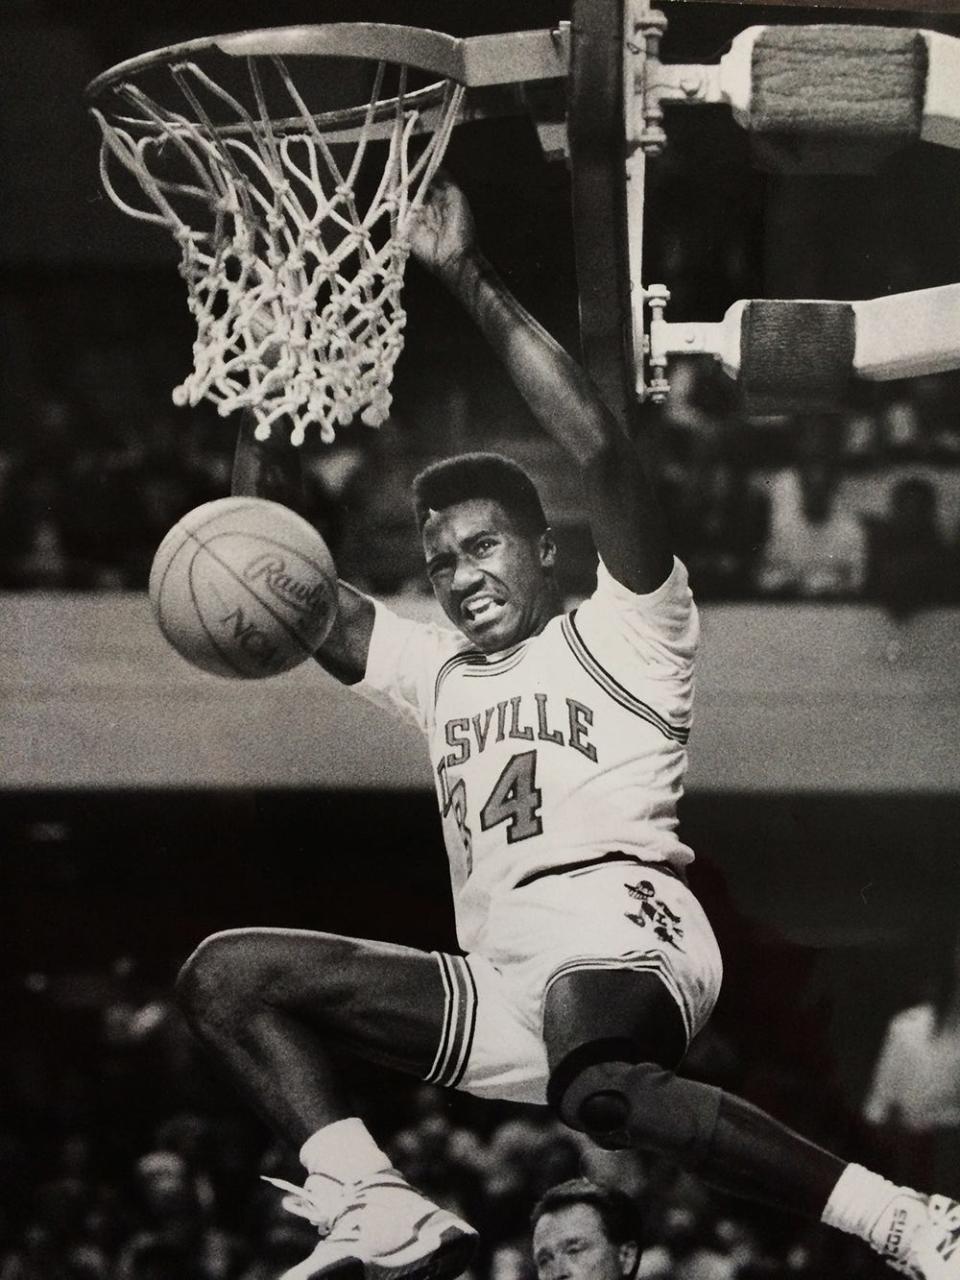 Everick Sullivan buried a dunk after after a steal in the opening minutes of the Cardinals' win over Vanderbilt on Dec. 7, 1989.